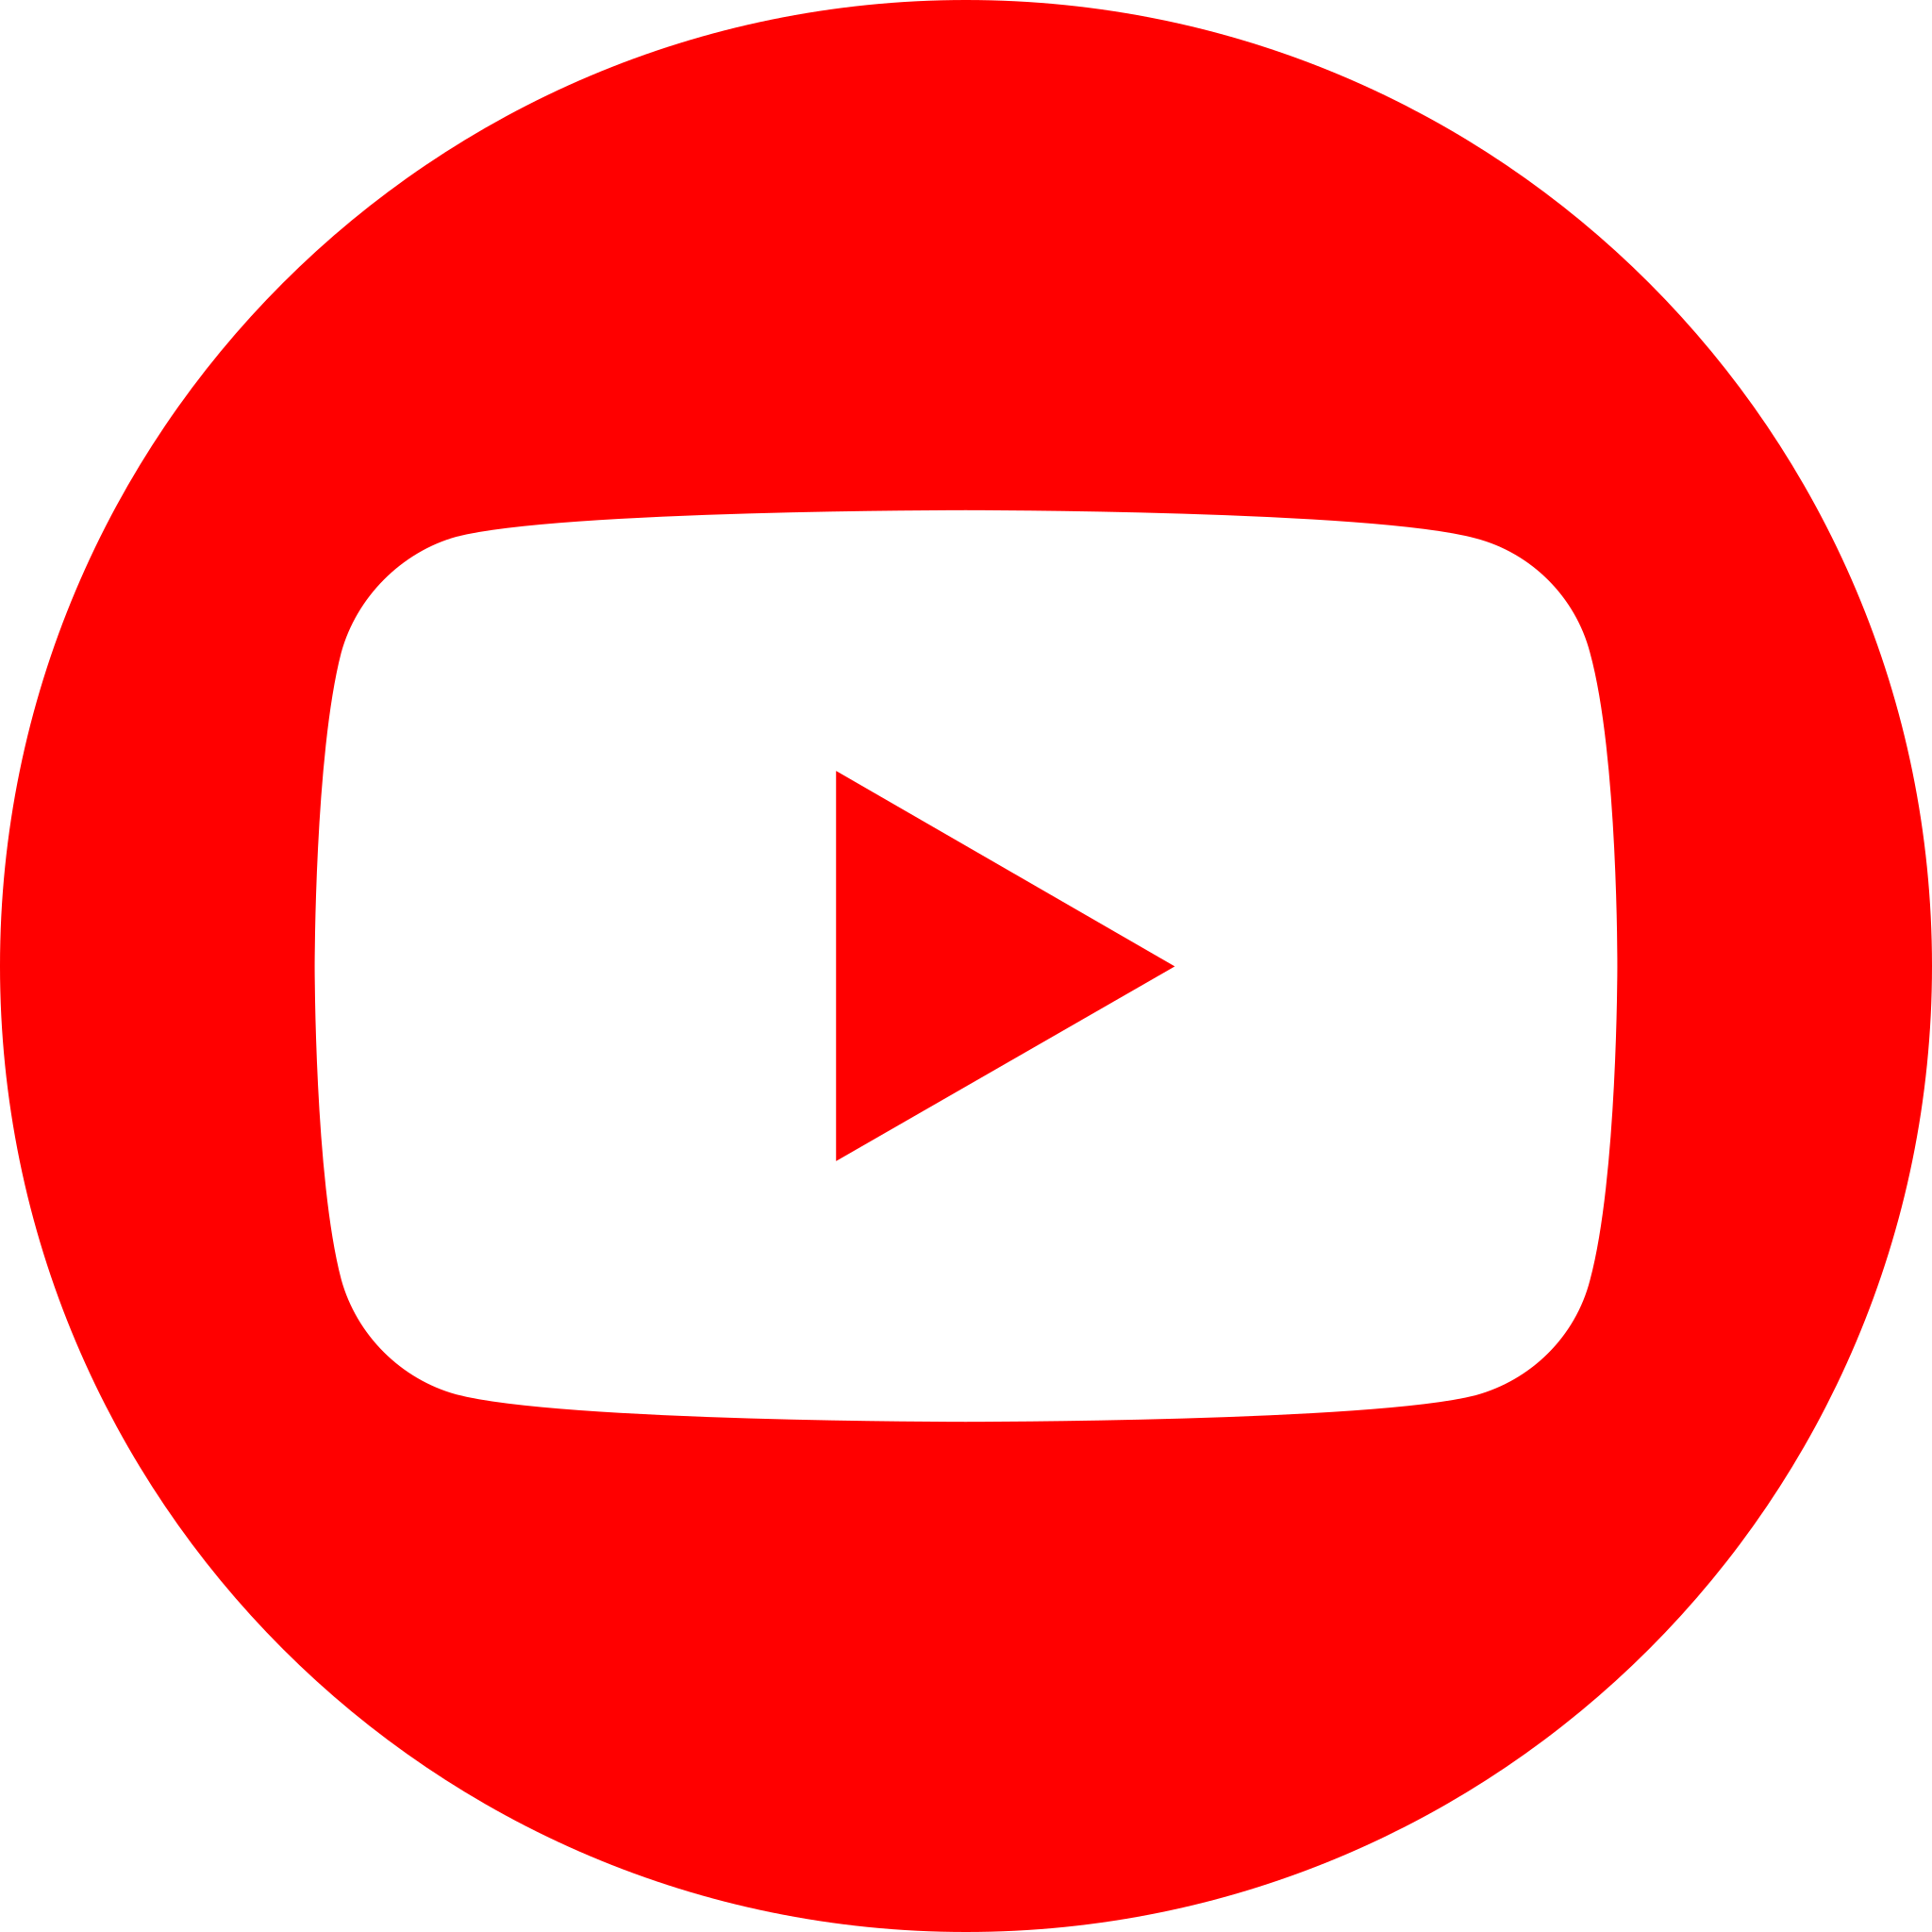 Subscribe to our YouTube